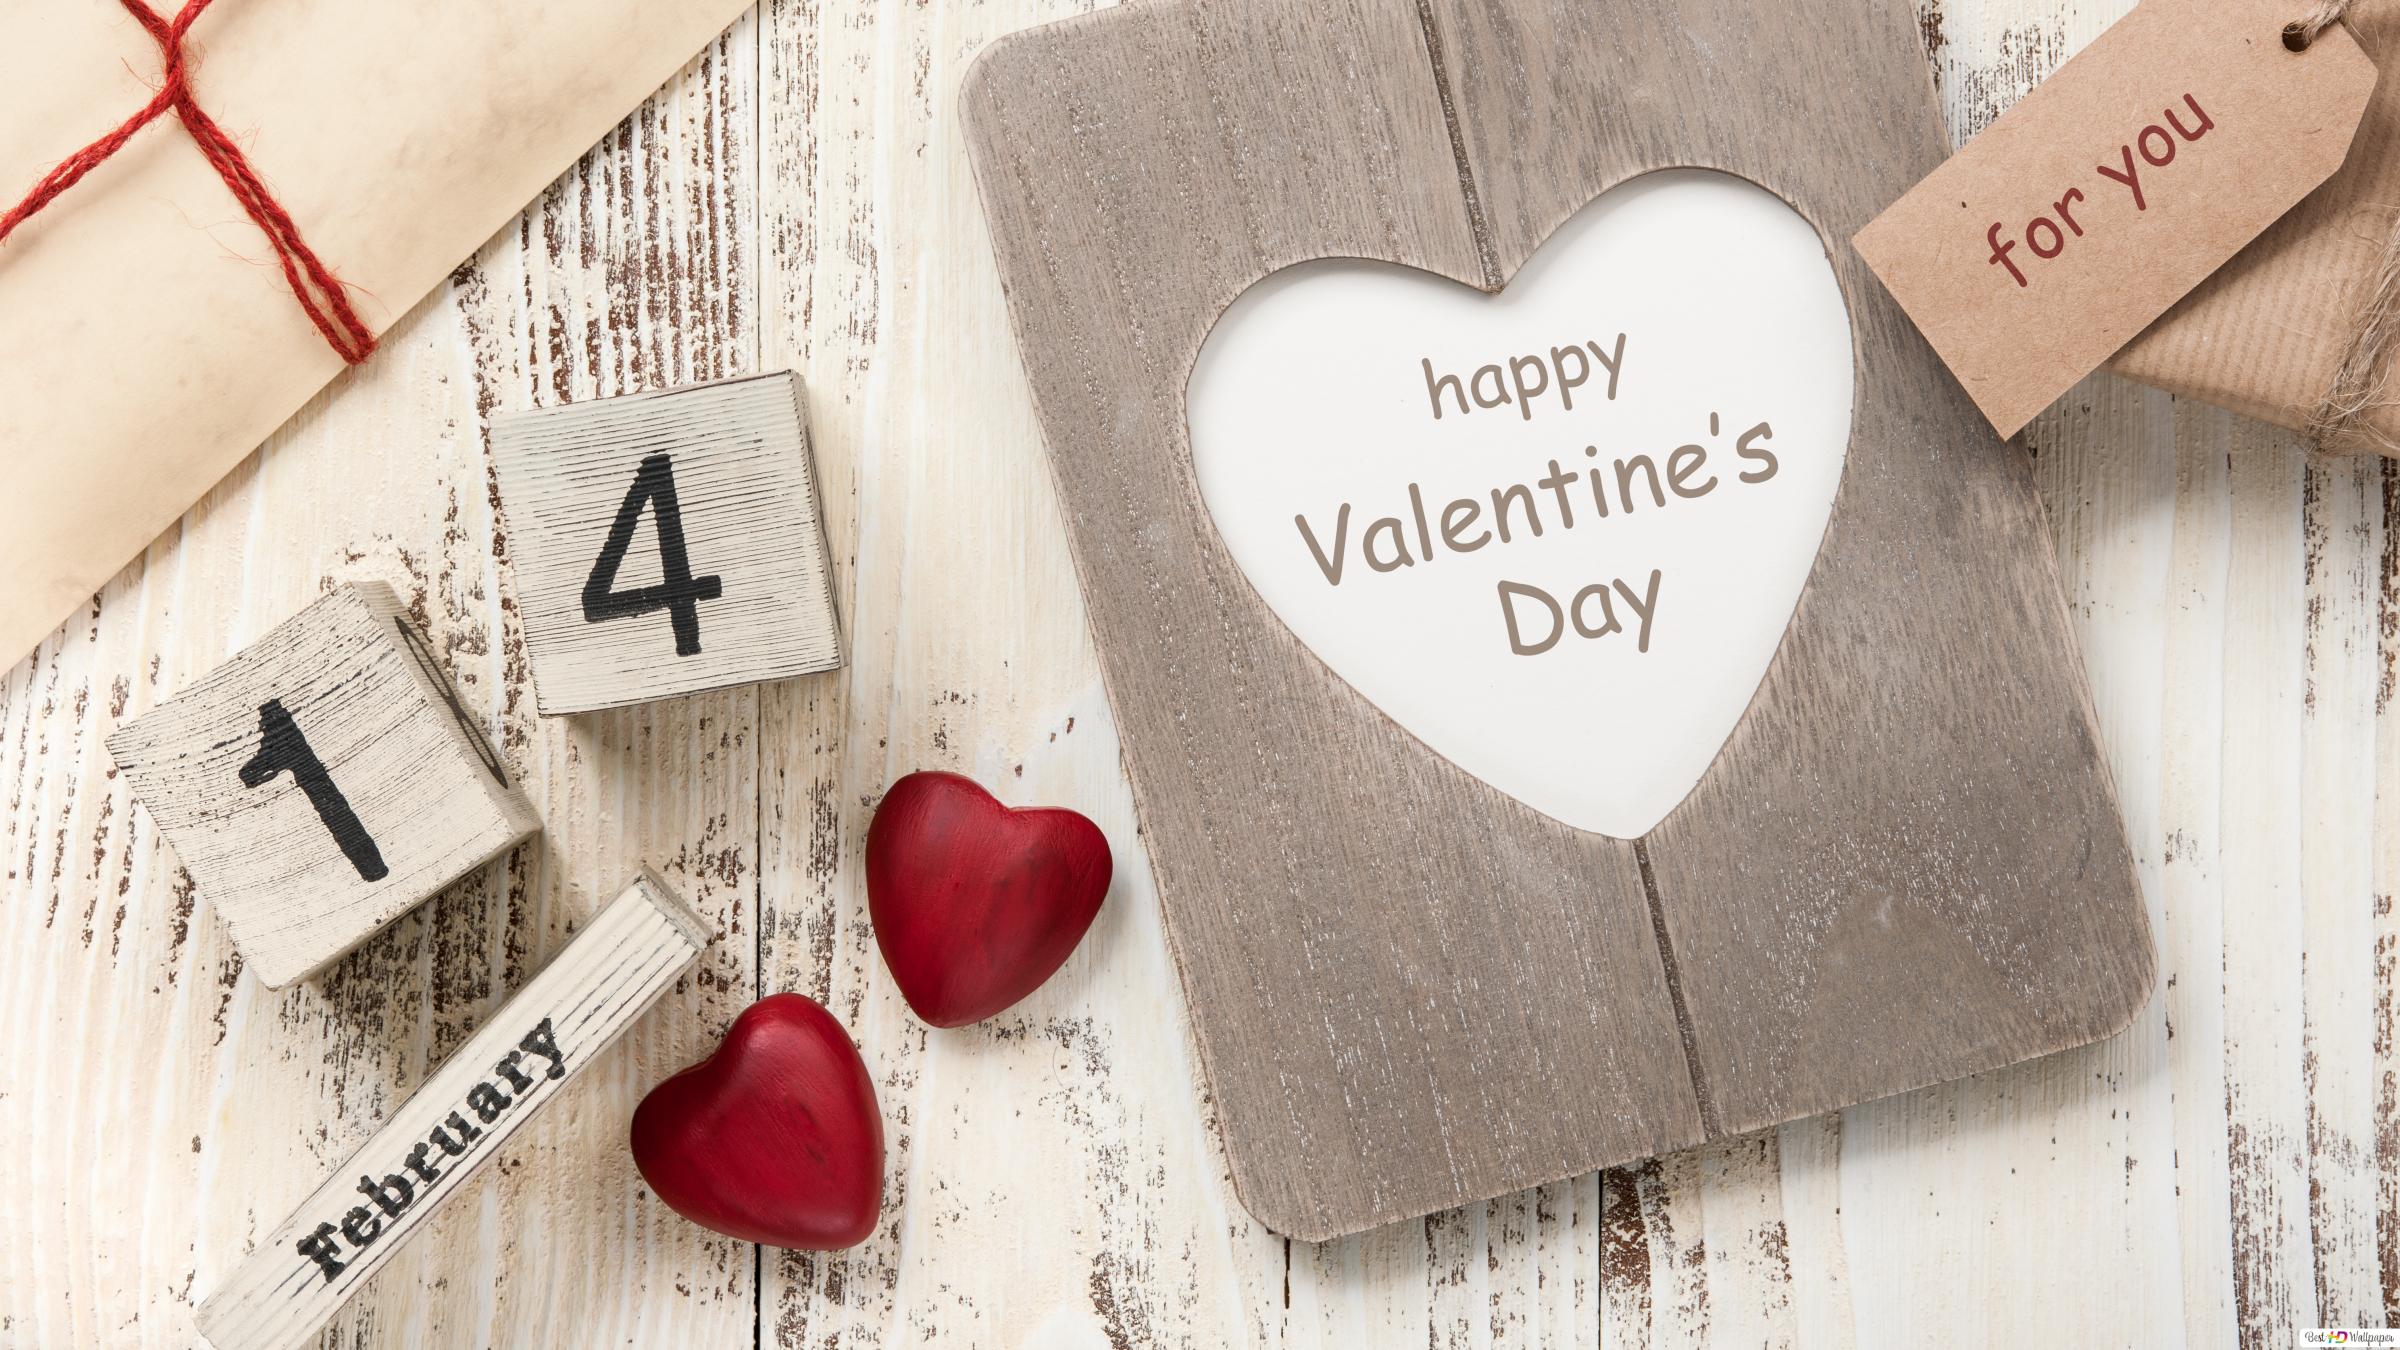 February Valentines cards and gifts ready in a white rustic plank HD wallpaper download's Day wallpaper